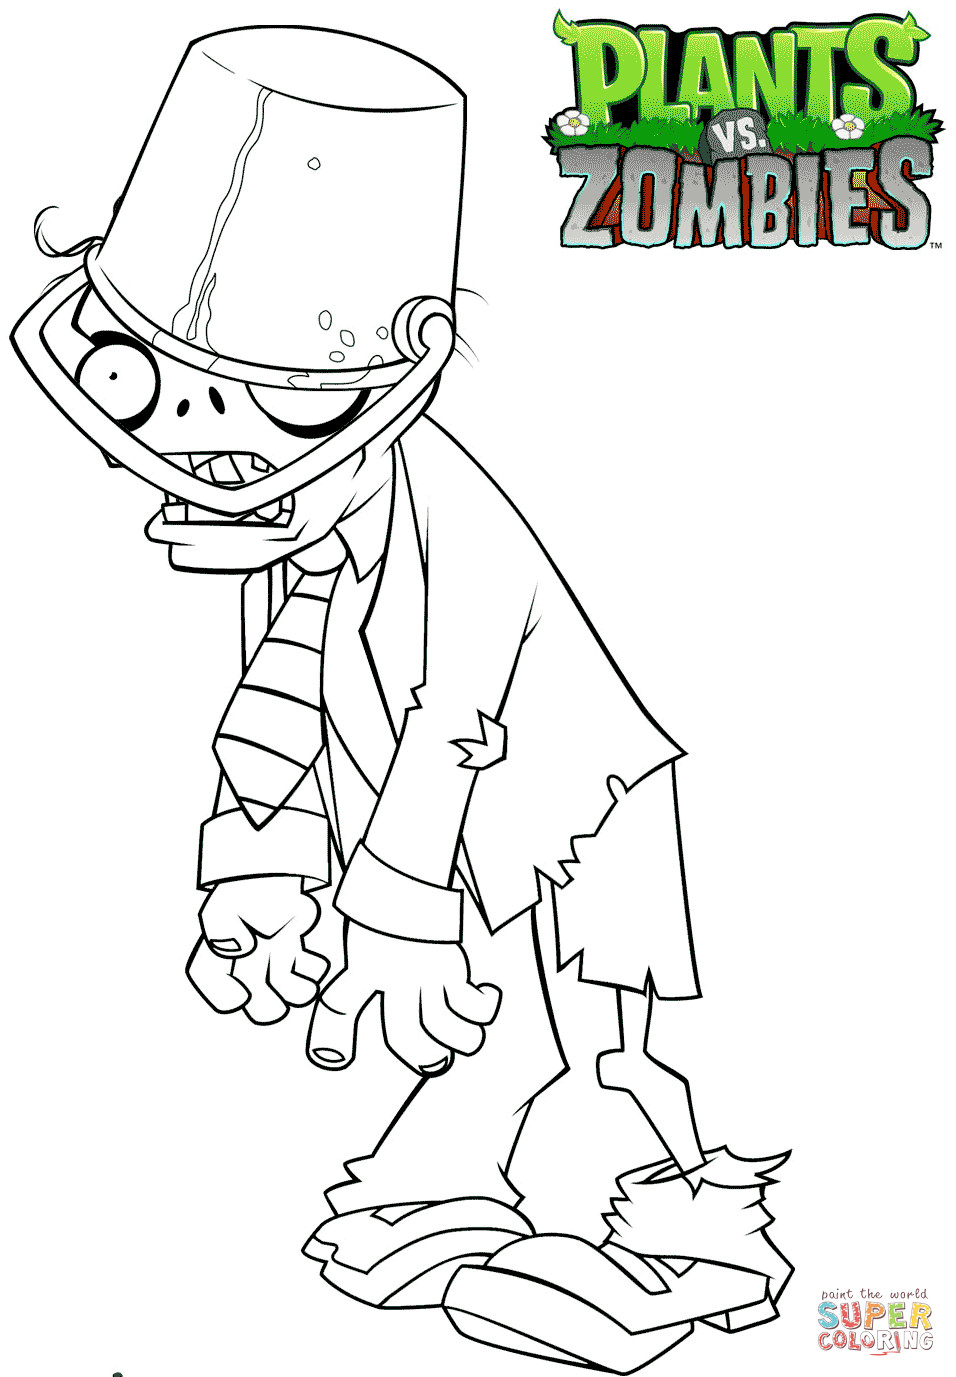 Zombie Printable Coloring Pages
 Plants vs Zombies Buckethead Zombie coloring page